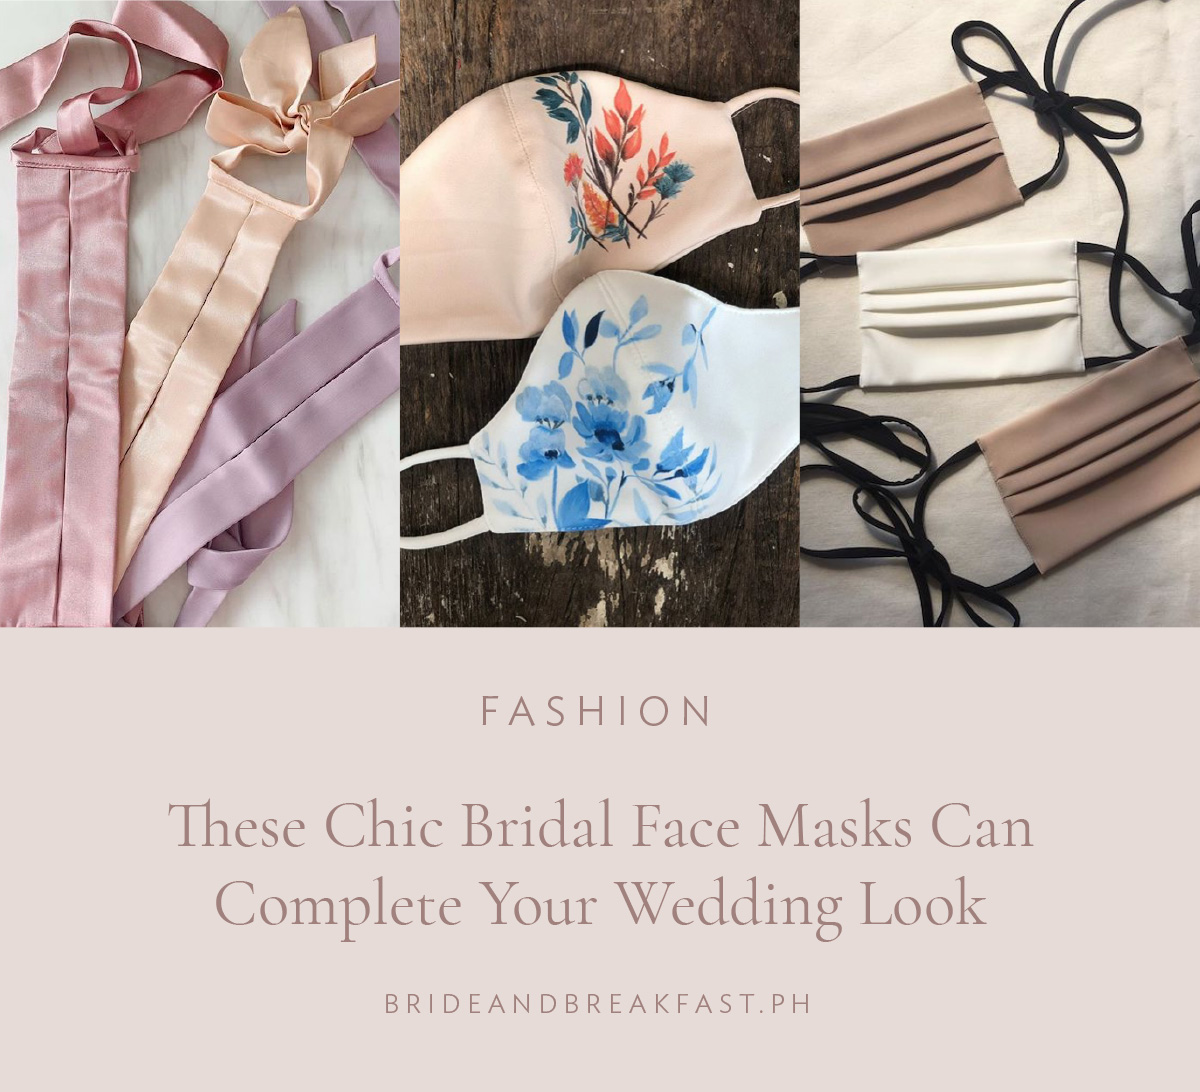 These Chic Bridal Face Masks Can Complete Your Wedding Look